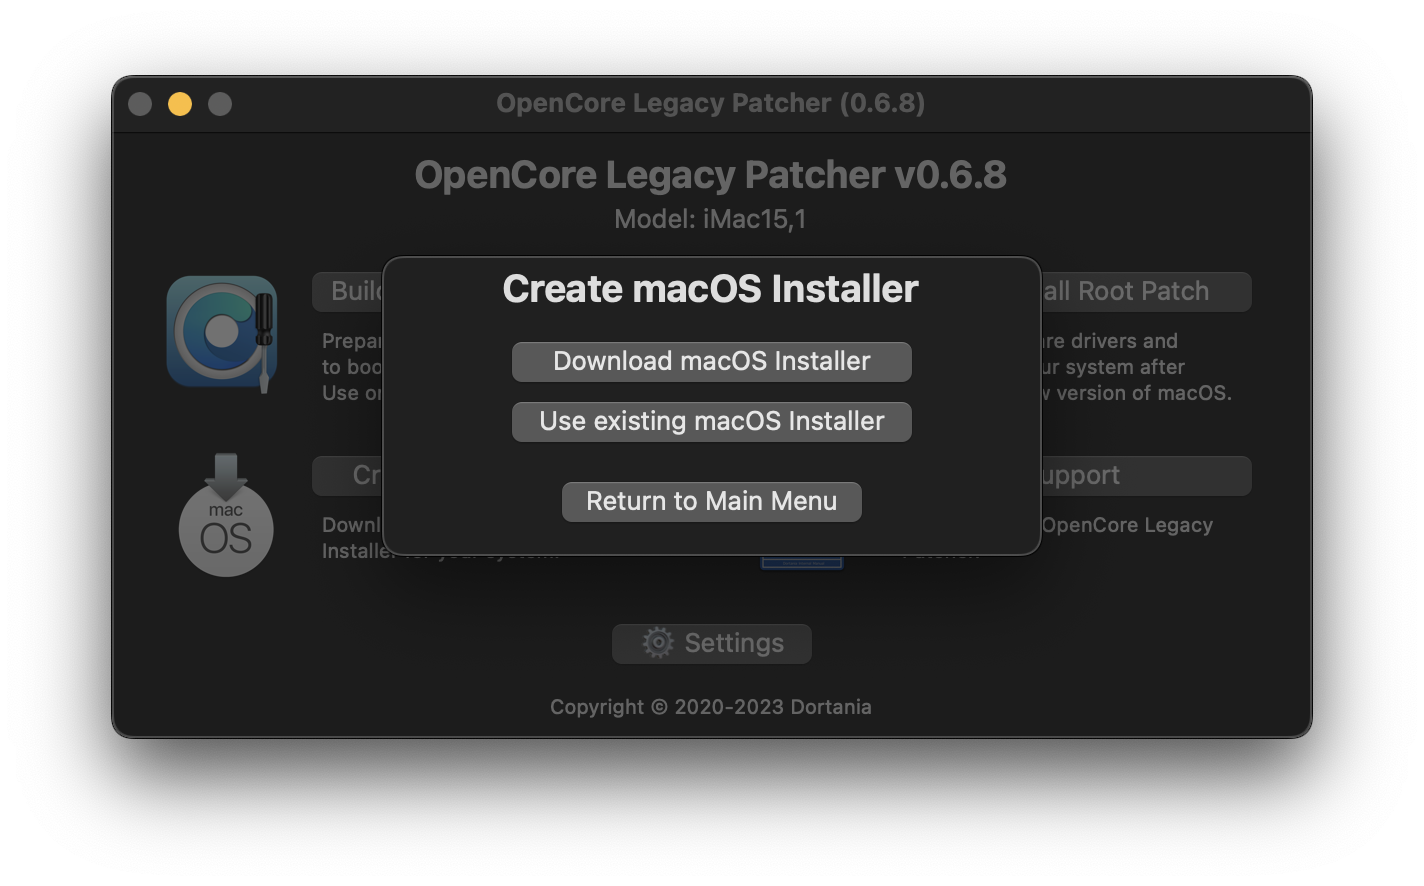 open core legacy patcher download